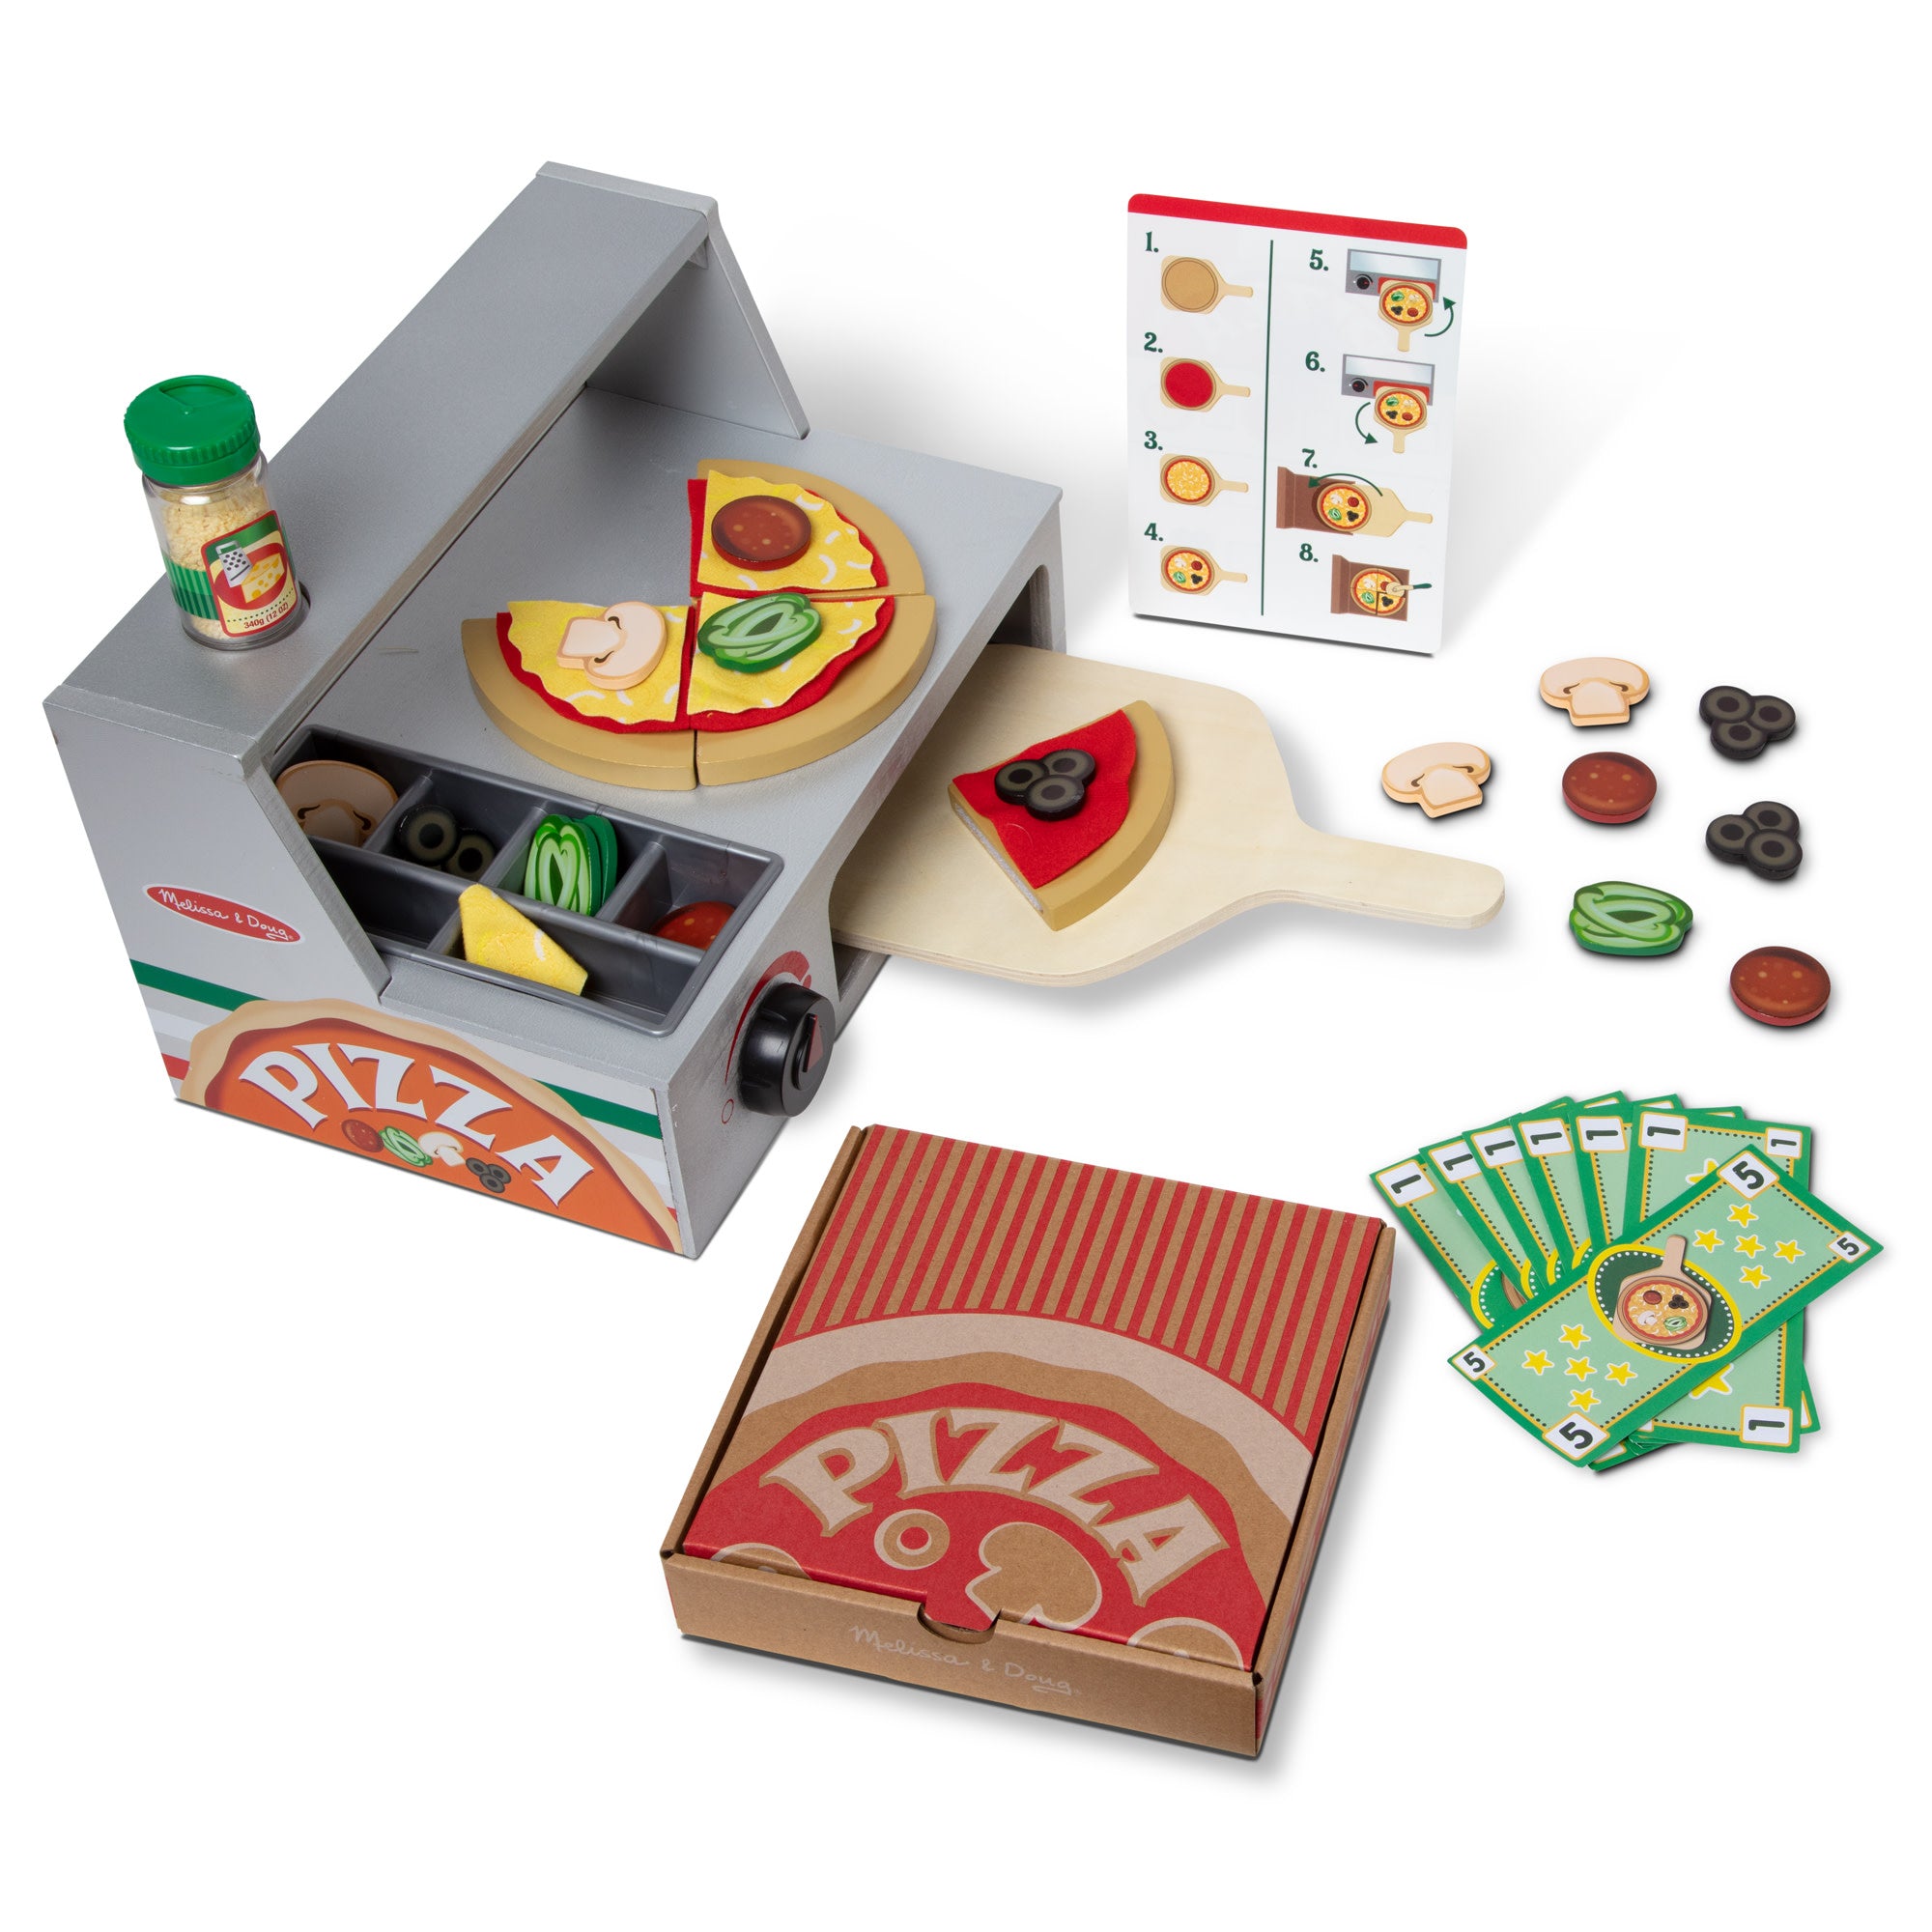 Top & Bake Pizza Counter Play Set - BrainyZoo Toys